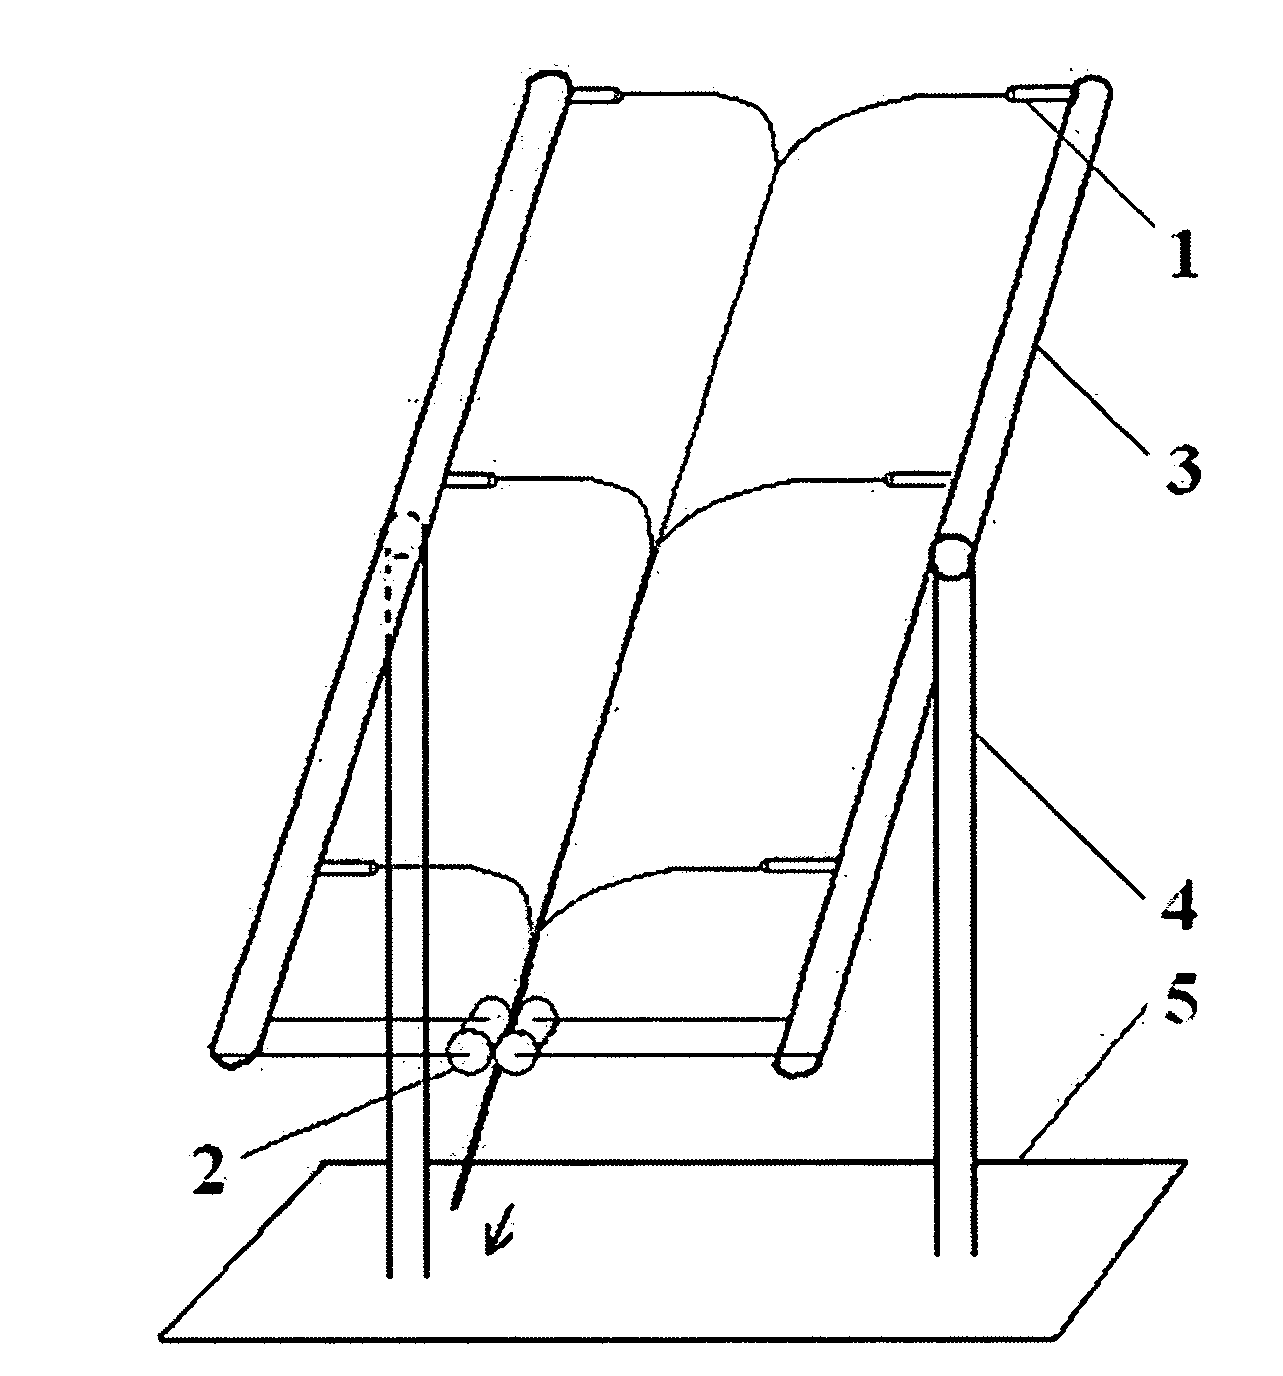 Device and Method for Preparing Filament Yarn of Composite Nanofibers